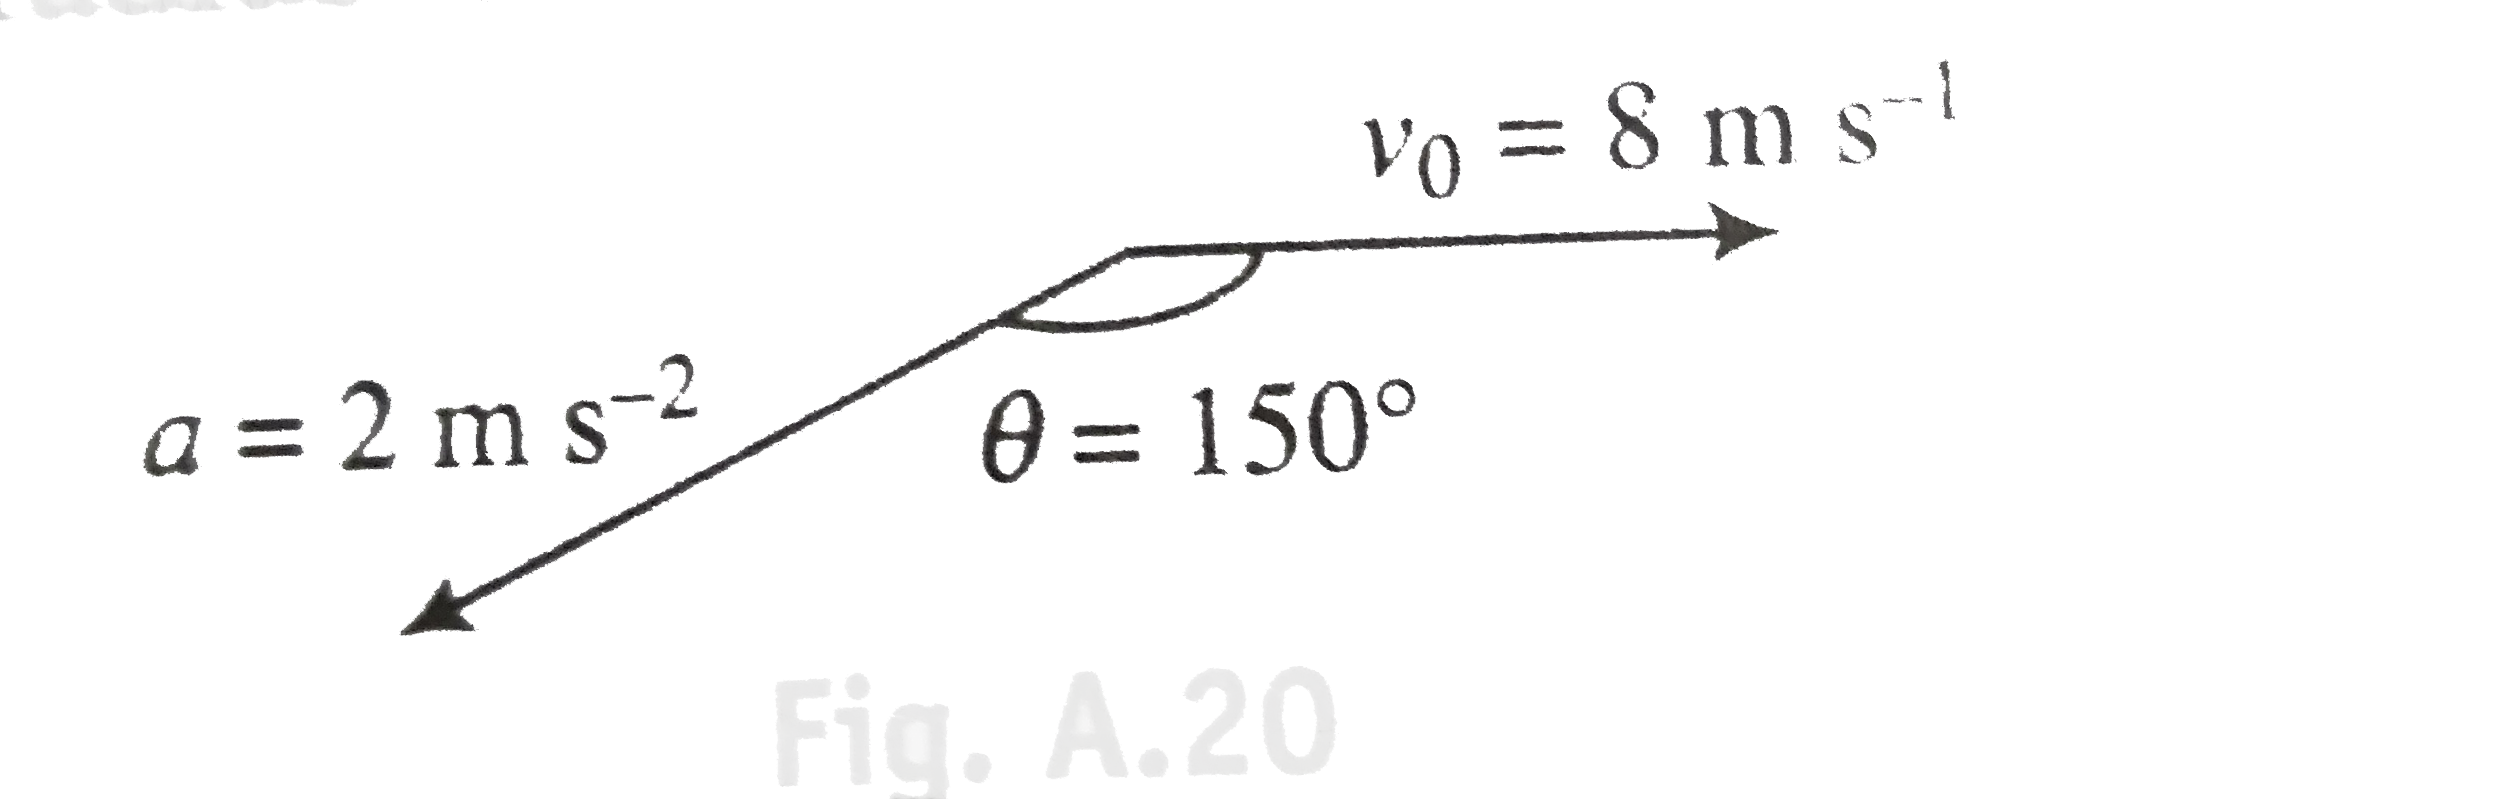 Figure shows the velocity and acceleration of a point line body at the initial moment of its motion. The acceleration vector of the body remains constant. The minimum radius of curvature of trajectory of the body is